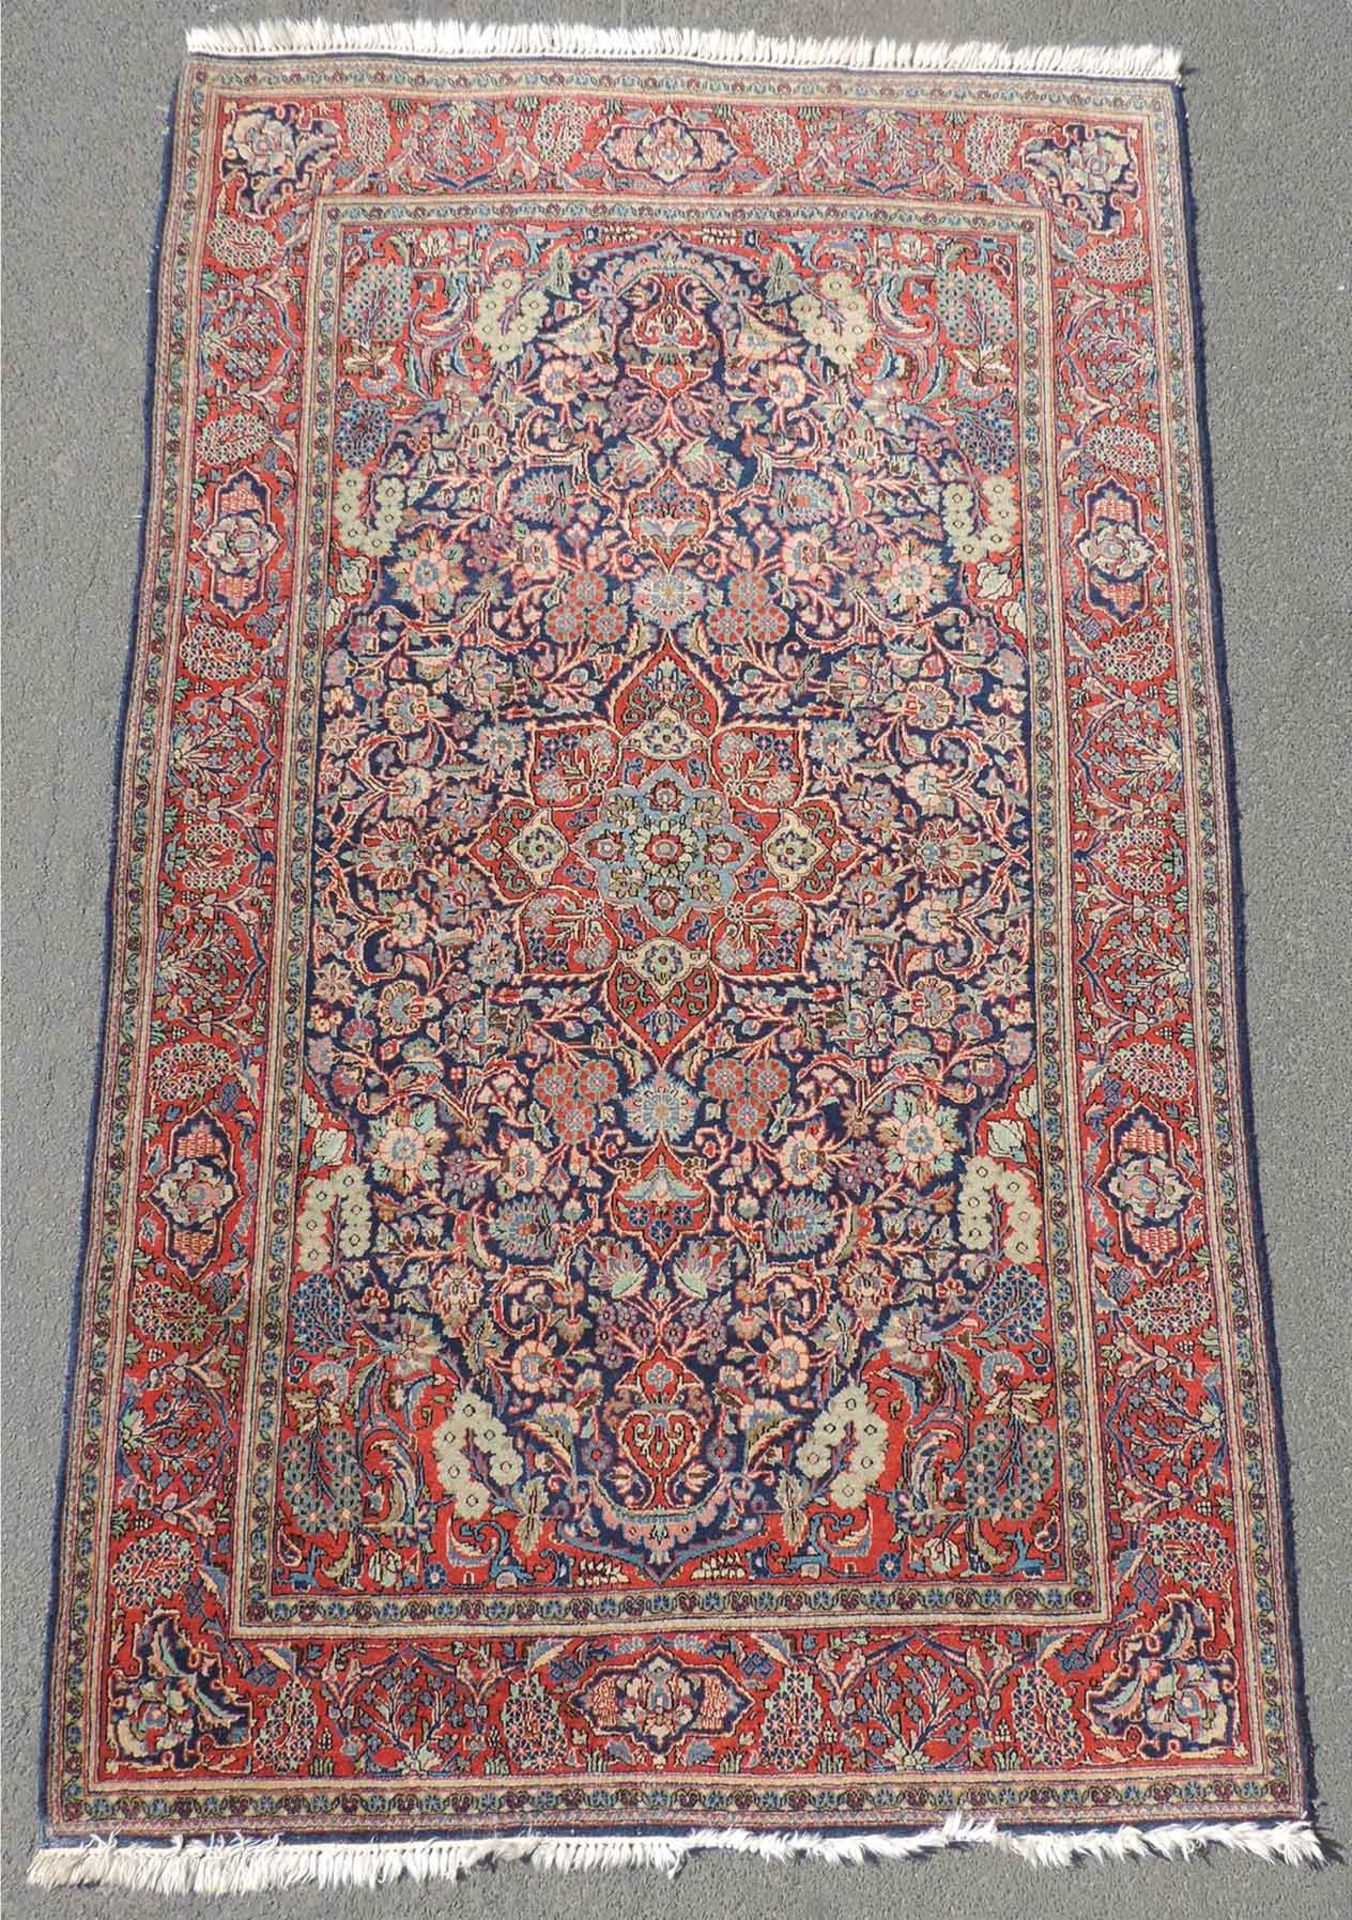 Keschan Persian rug. Iran. Old, circa 80 years. Fine weave.221 cm x 134 cm. Knotted by hand. Cork